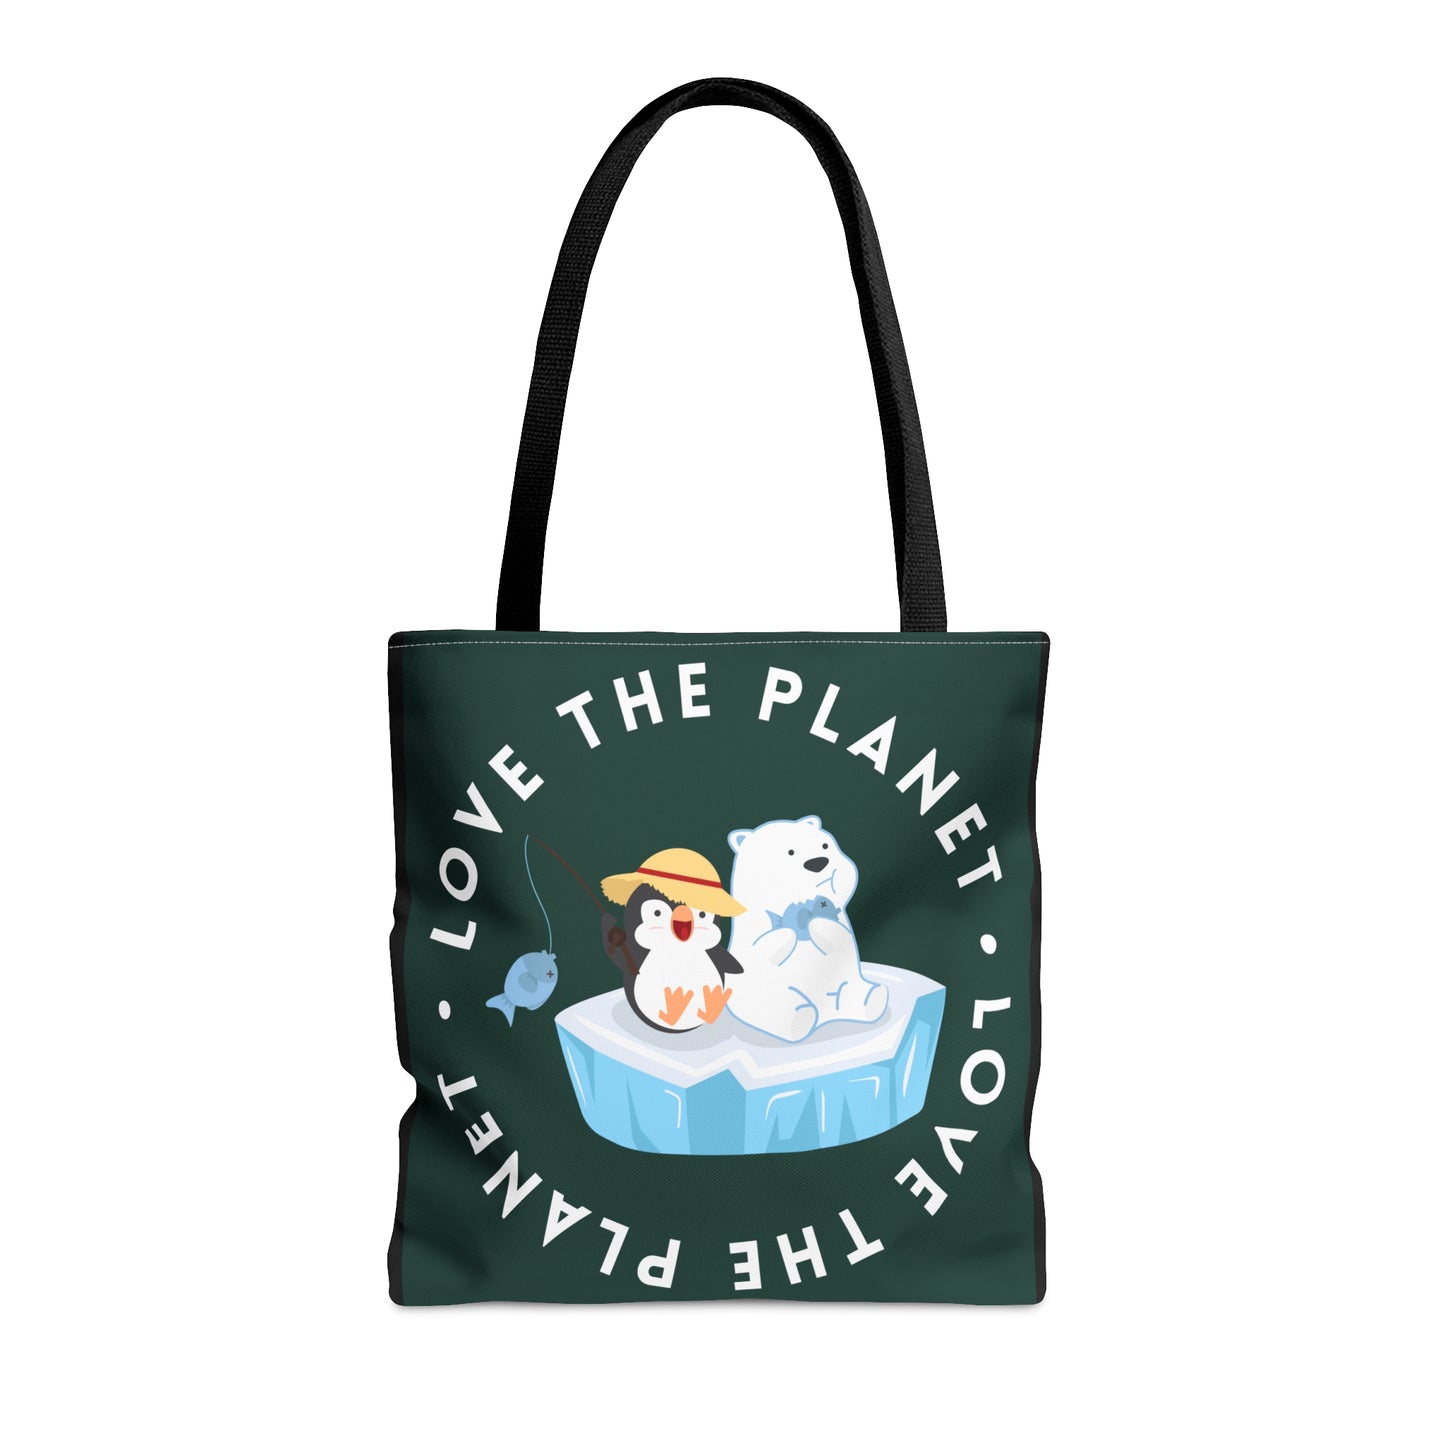 Cute polar bear, penguin and fish inside a  “LOVE THE PLANET” Tote Bag in 3 sizes to meet your needs.